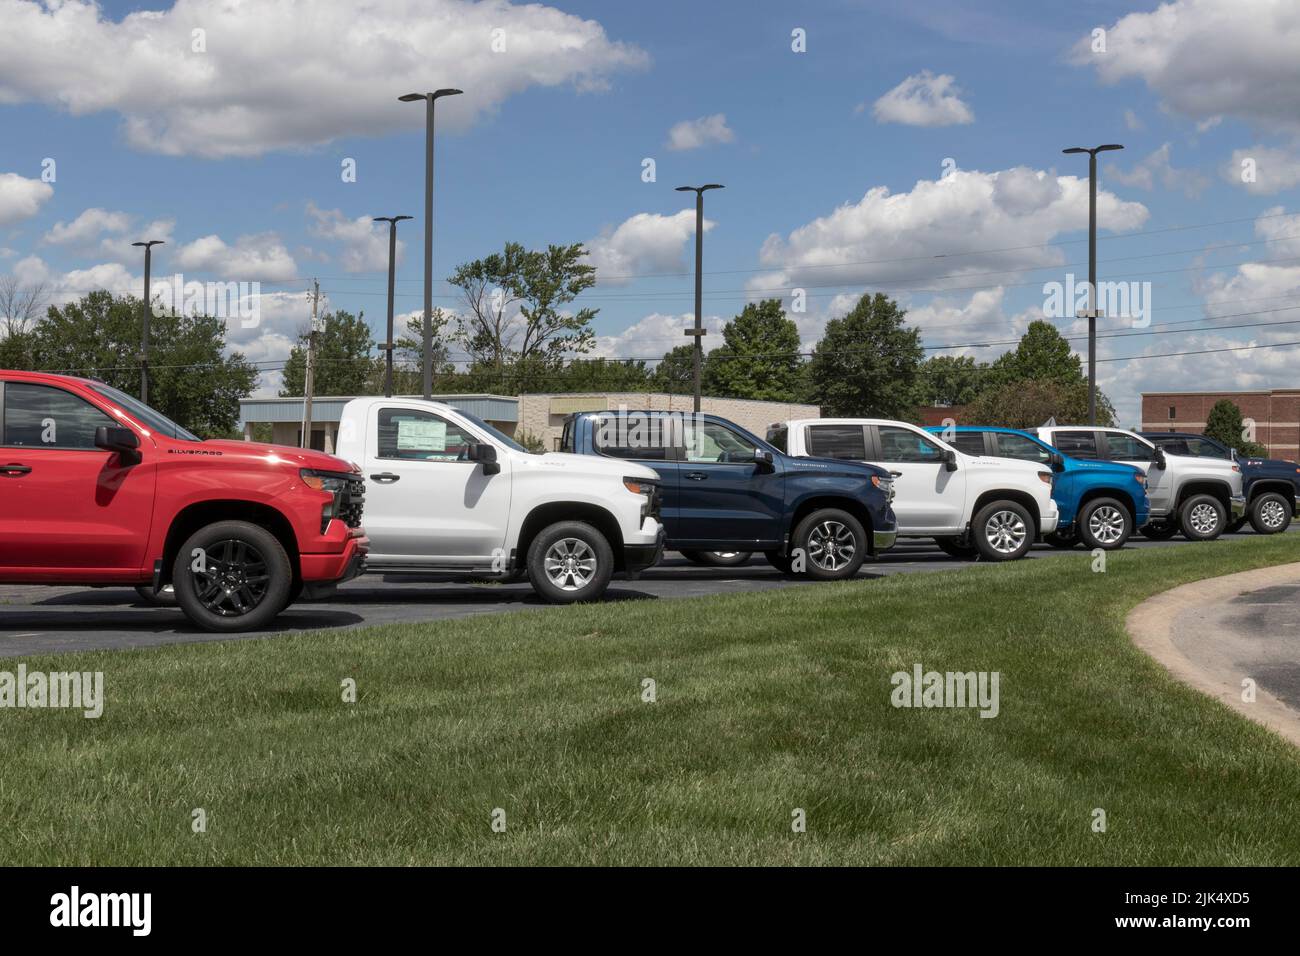 Indianapolis - Circa July 2022: Chevrolet Silverado 1500 display. Chevy offers the Silverado in WT, Trail Boss, LT, RST, and Custom models. Stock Photo